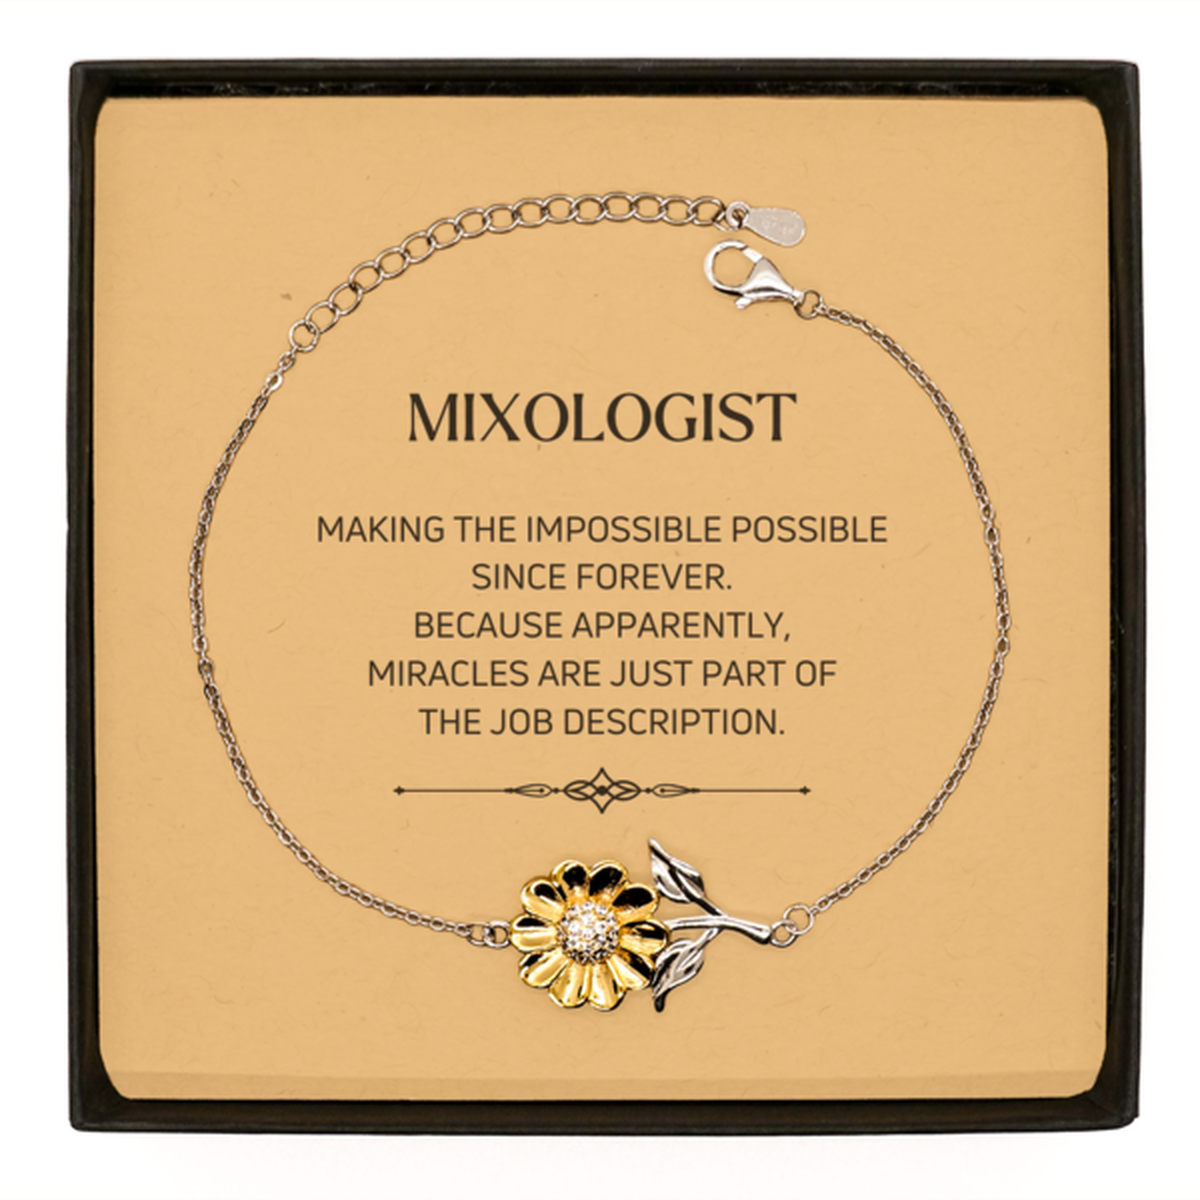 Funny Mixologist Gifts, Miracles are just part of the job description, Inspirational Birthday Sunflower Bracelet For Mixologist, Men, Women, Coworkers, Friends, Boss